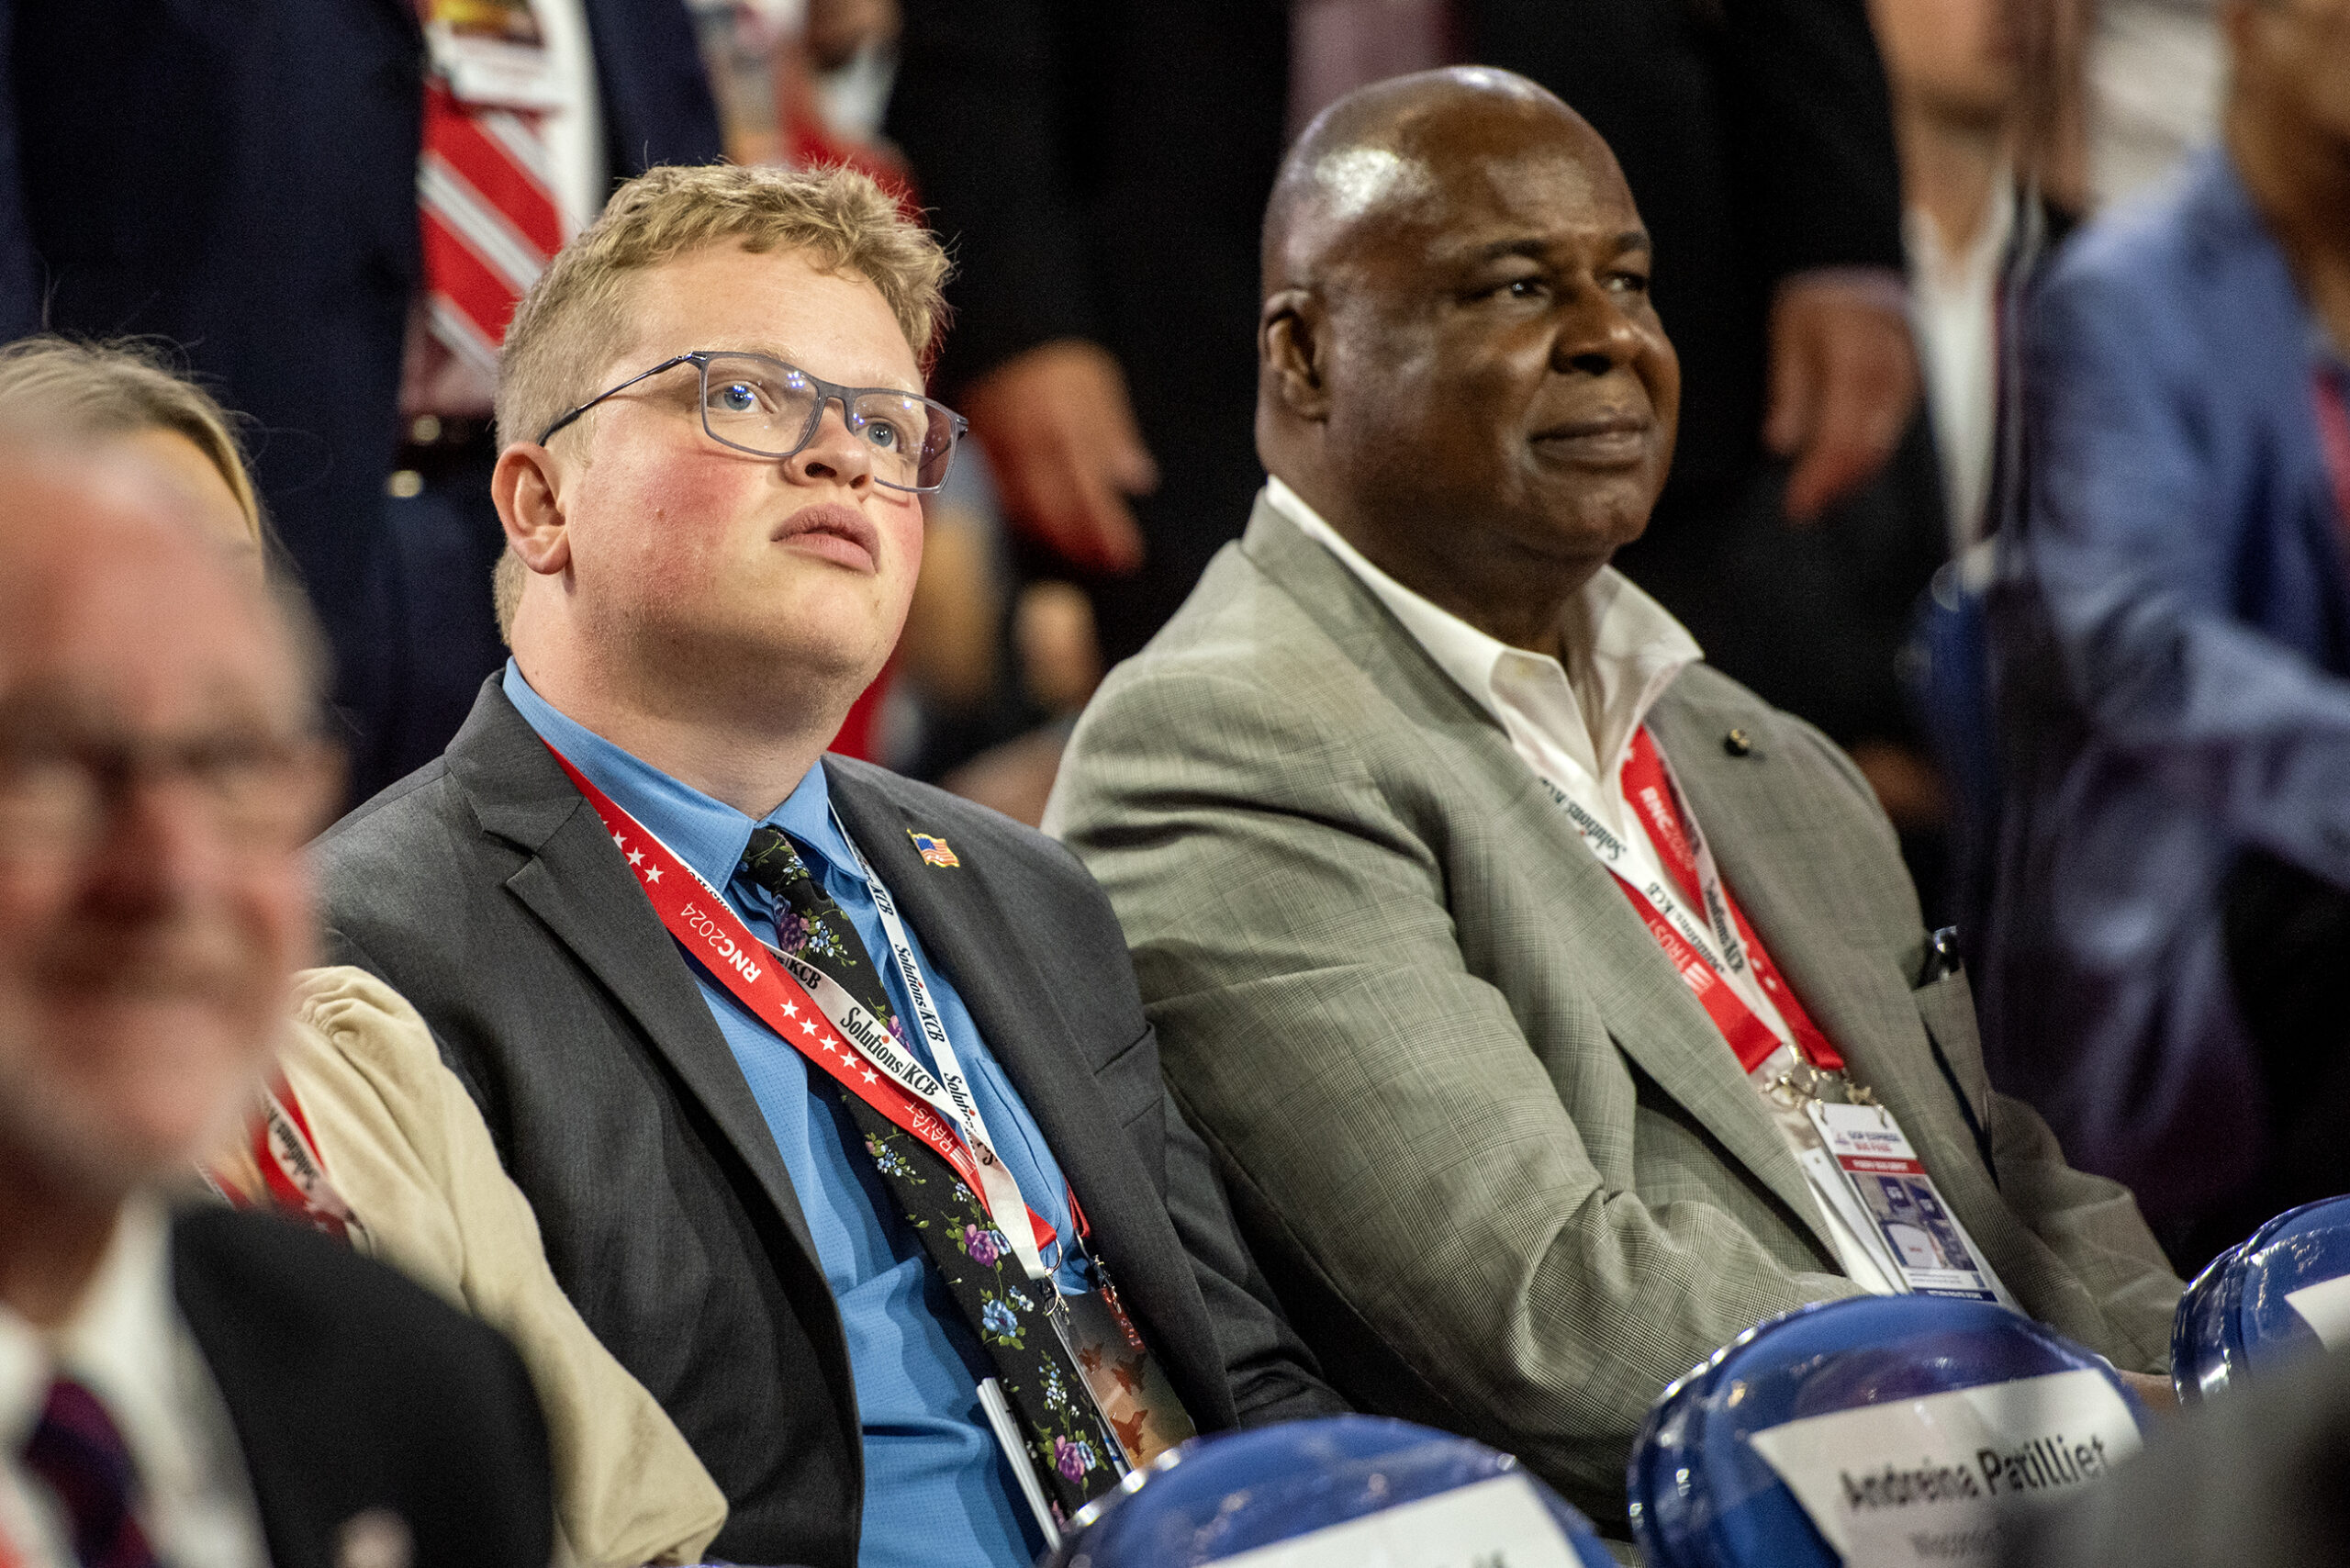 Young Wisconsin Republicans at RNC say they’re ready to lead next generation of GOP